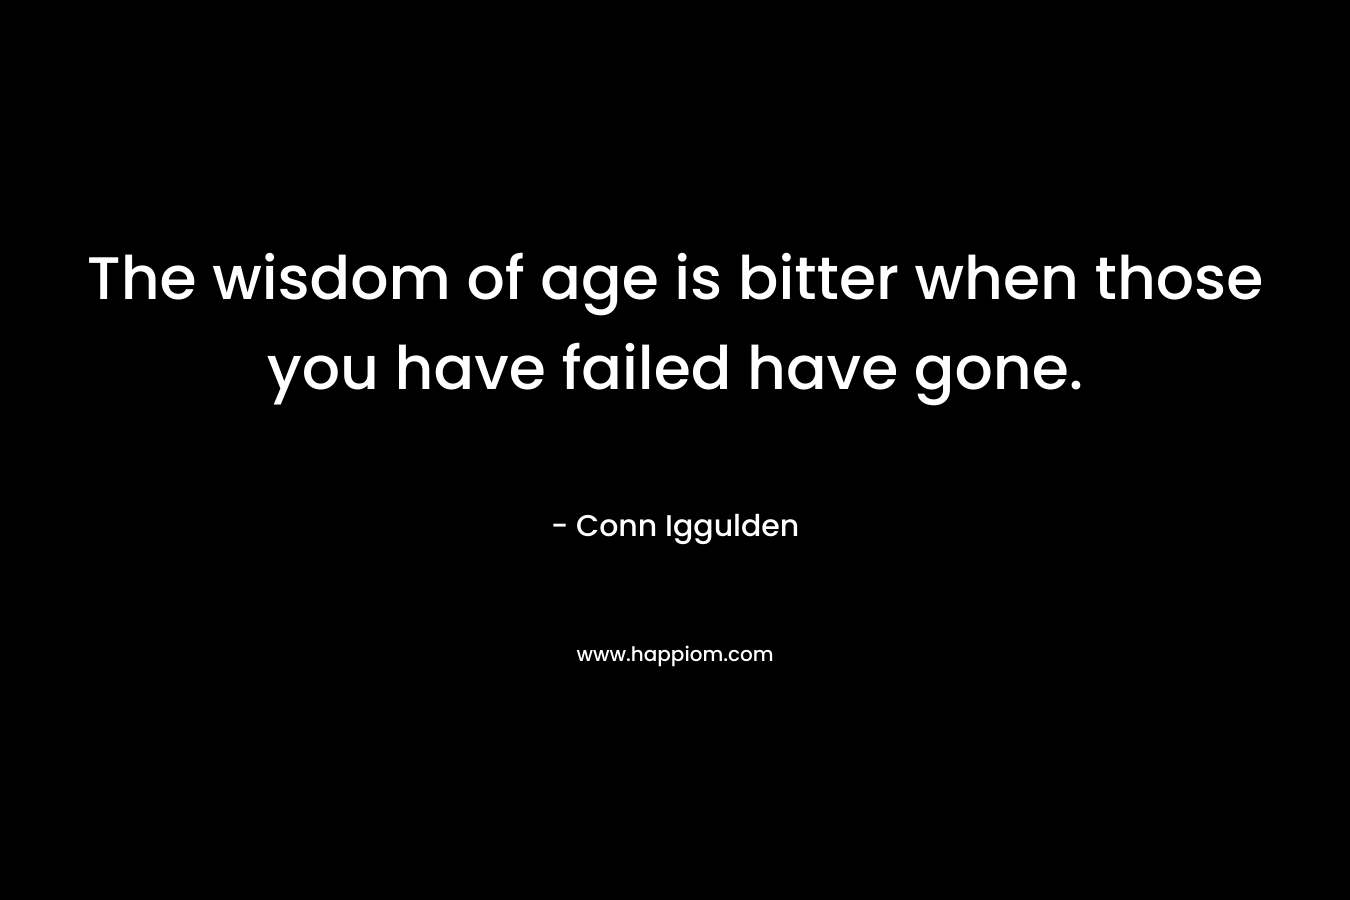 The wisdom of age is bitter when those you have failed have gone. – Conn Iggulden